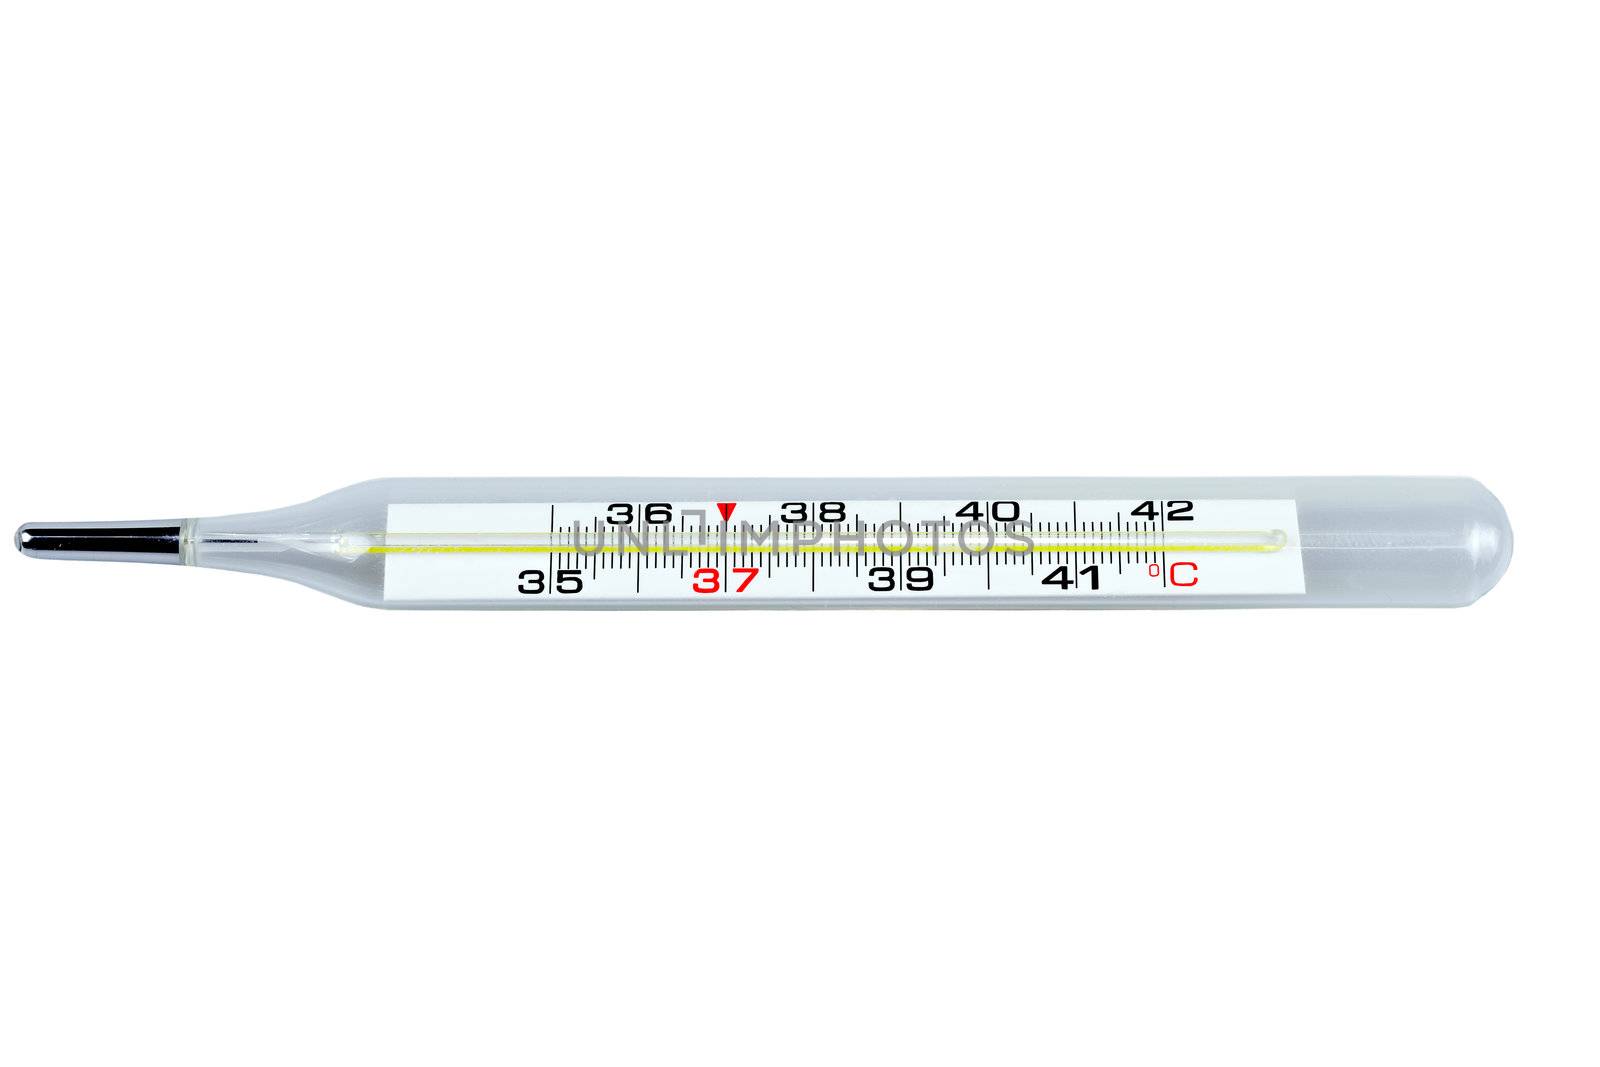 Medical thermometer by Roka